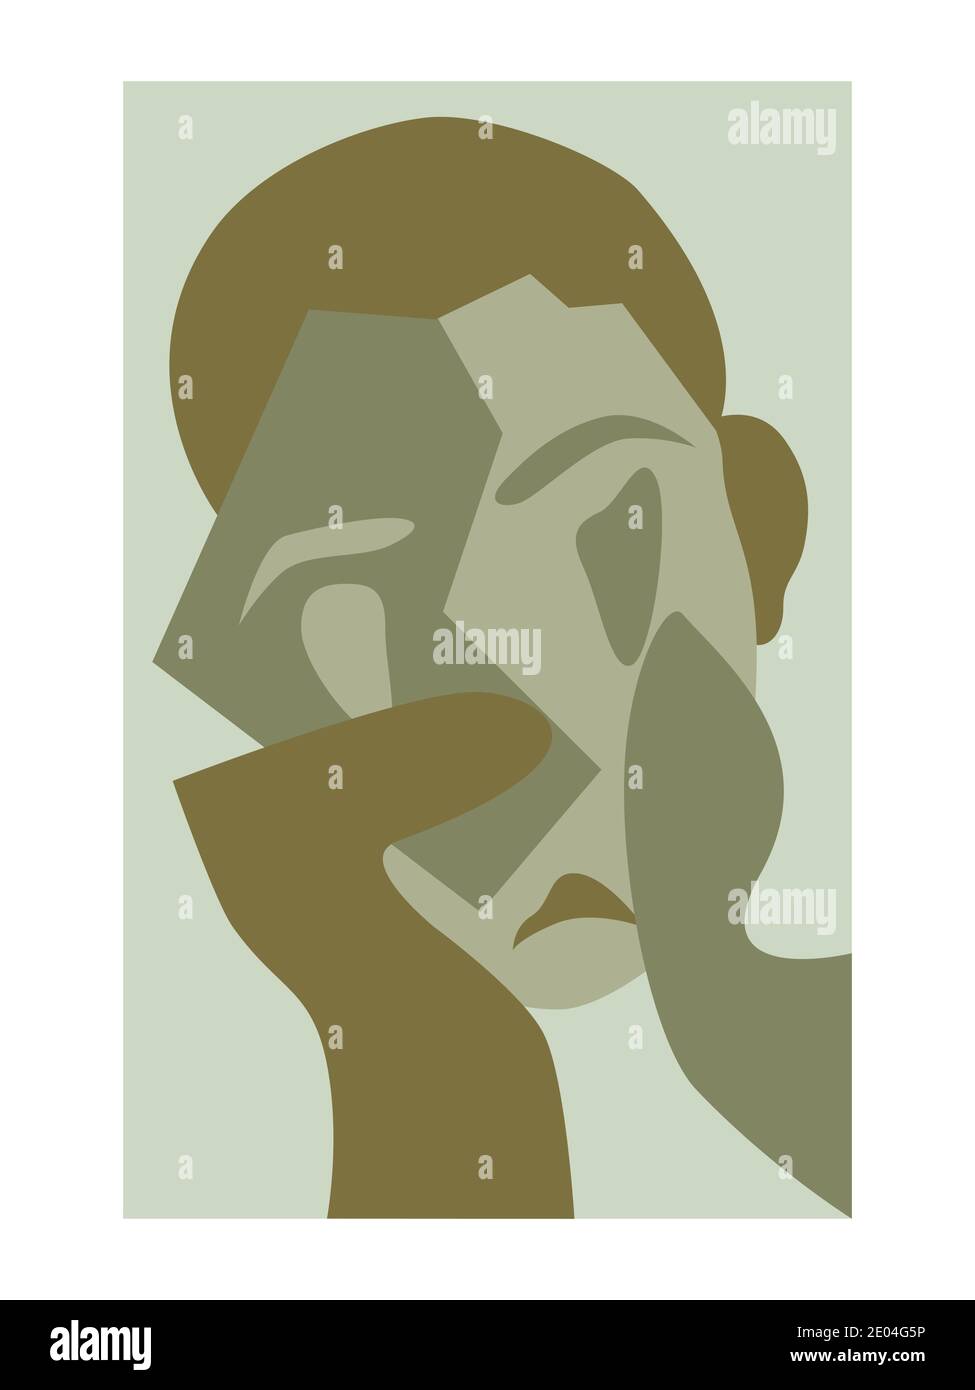 Monochrome abstract portrait. Person close-up. Cubism art style. Isolated vector illustration Stock Vector